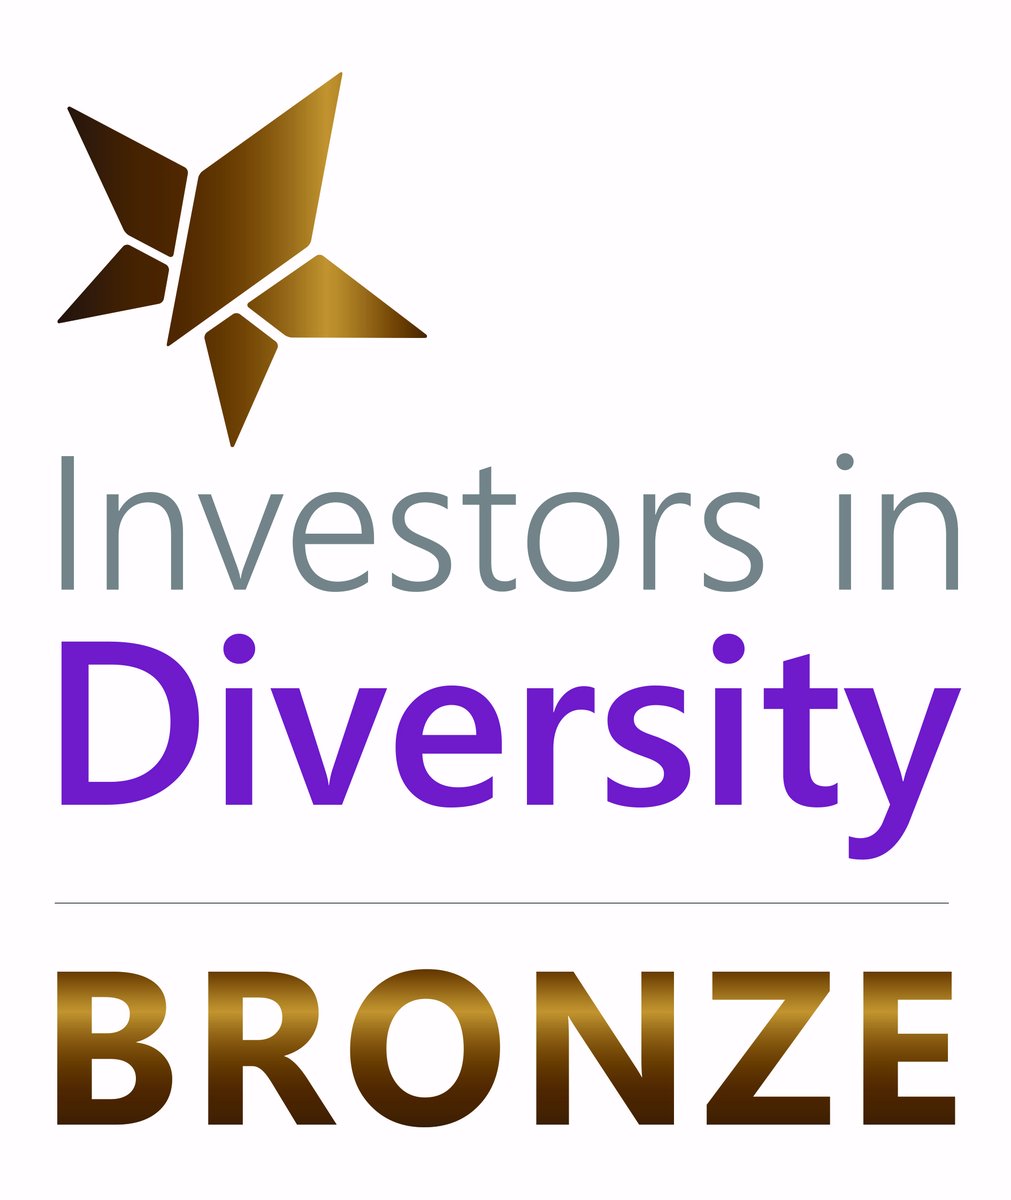 We are delighted to achieve the Investors in Diversity Bronze Award from the Irish Centre for Diversity for our ongoing commitment to diversity & inclusion in the workplace and business, in response to the changes happening in our society. Read more here: irishcentrefordiversity.ie/investors-in-d…